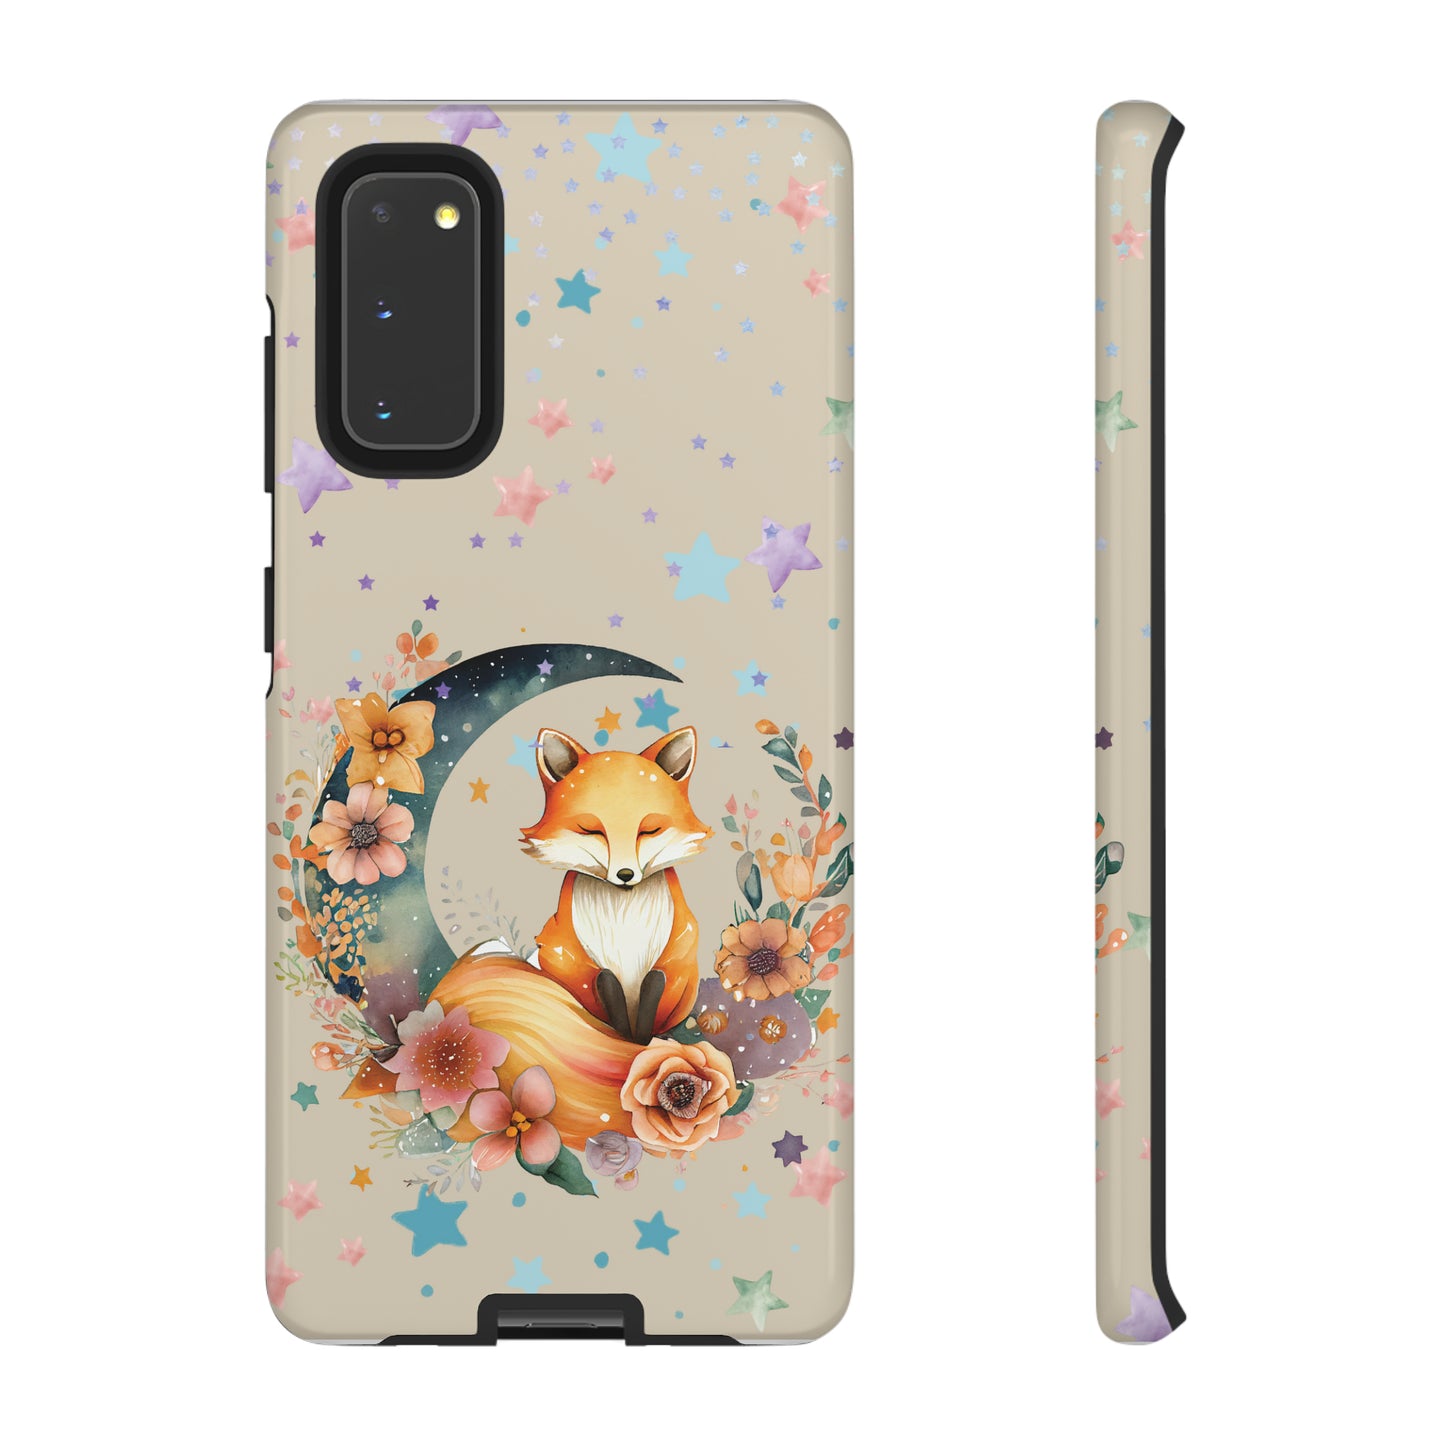 Fox with Moon and Stars Phone Case - Whimsical Design Celestial Fox Harmony- Magical Protective Cover Tough Cases